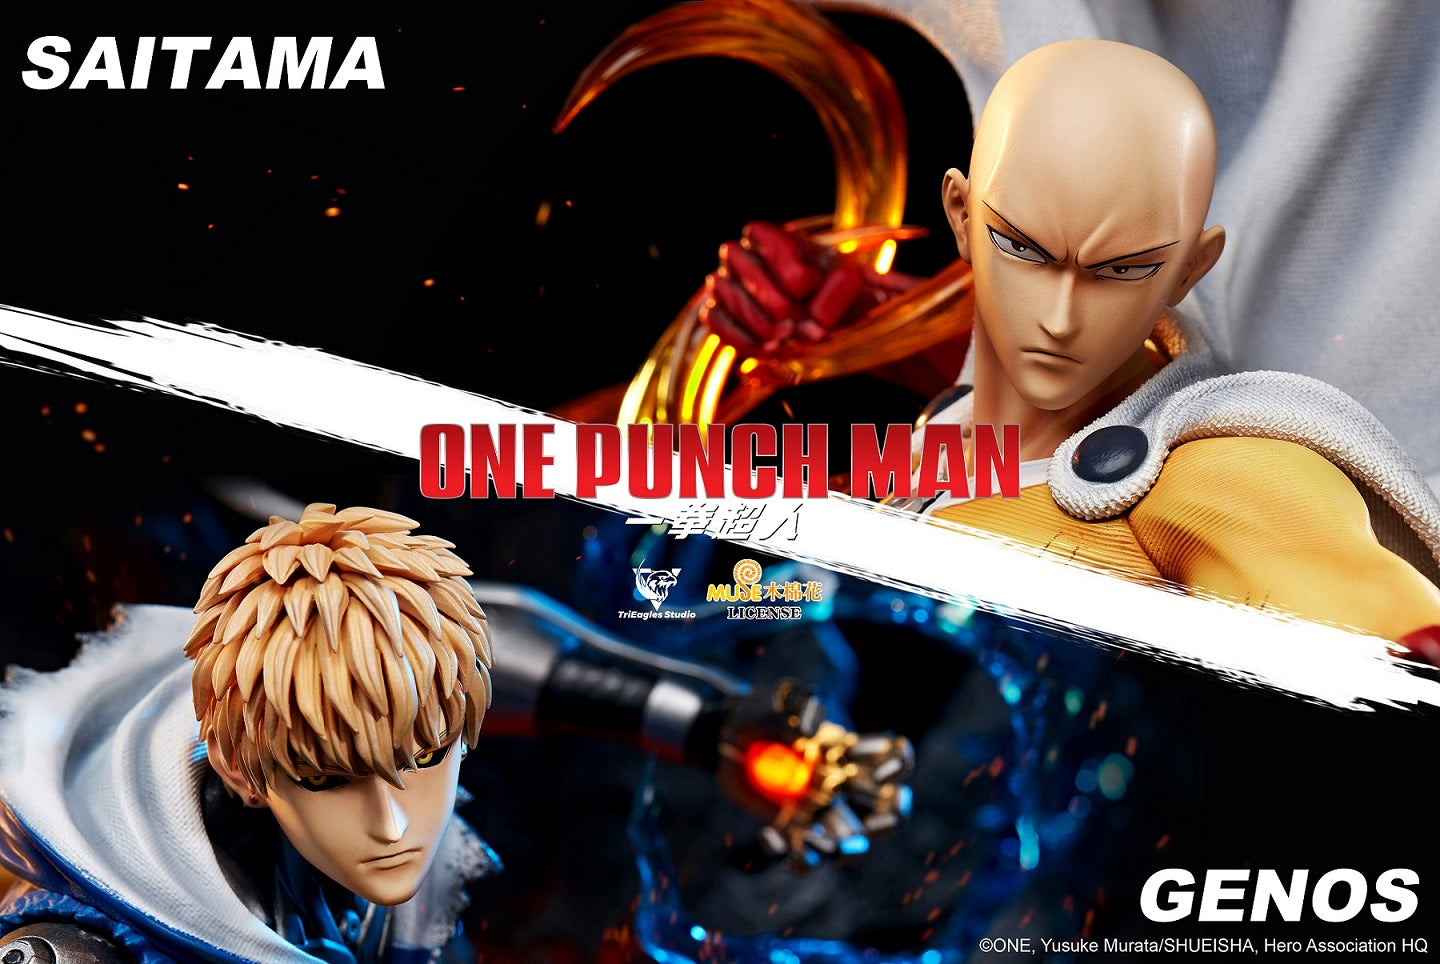 TRIEAGLES STUDIO – ONE PUNCH MAN: SAITAMA AND GENOS (LICENSED) [SOLD OUT]